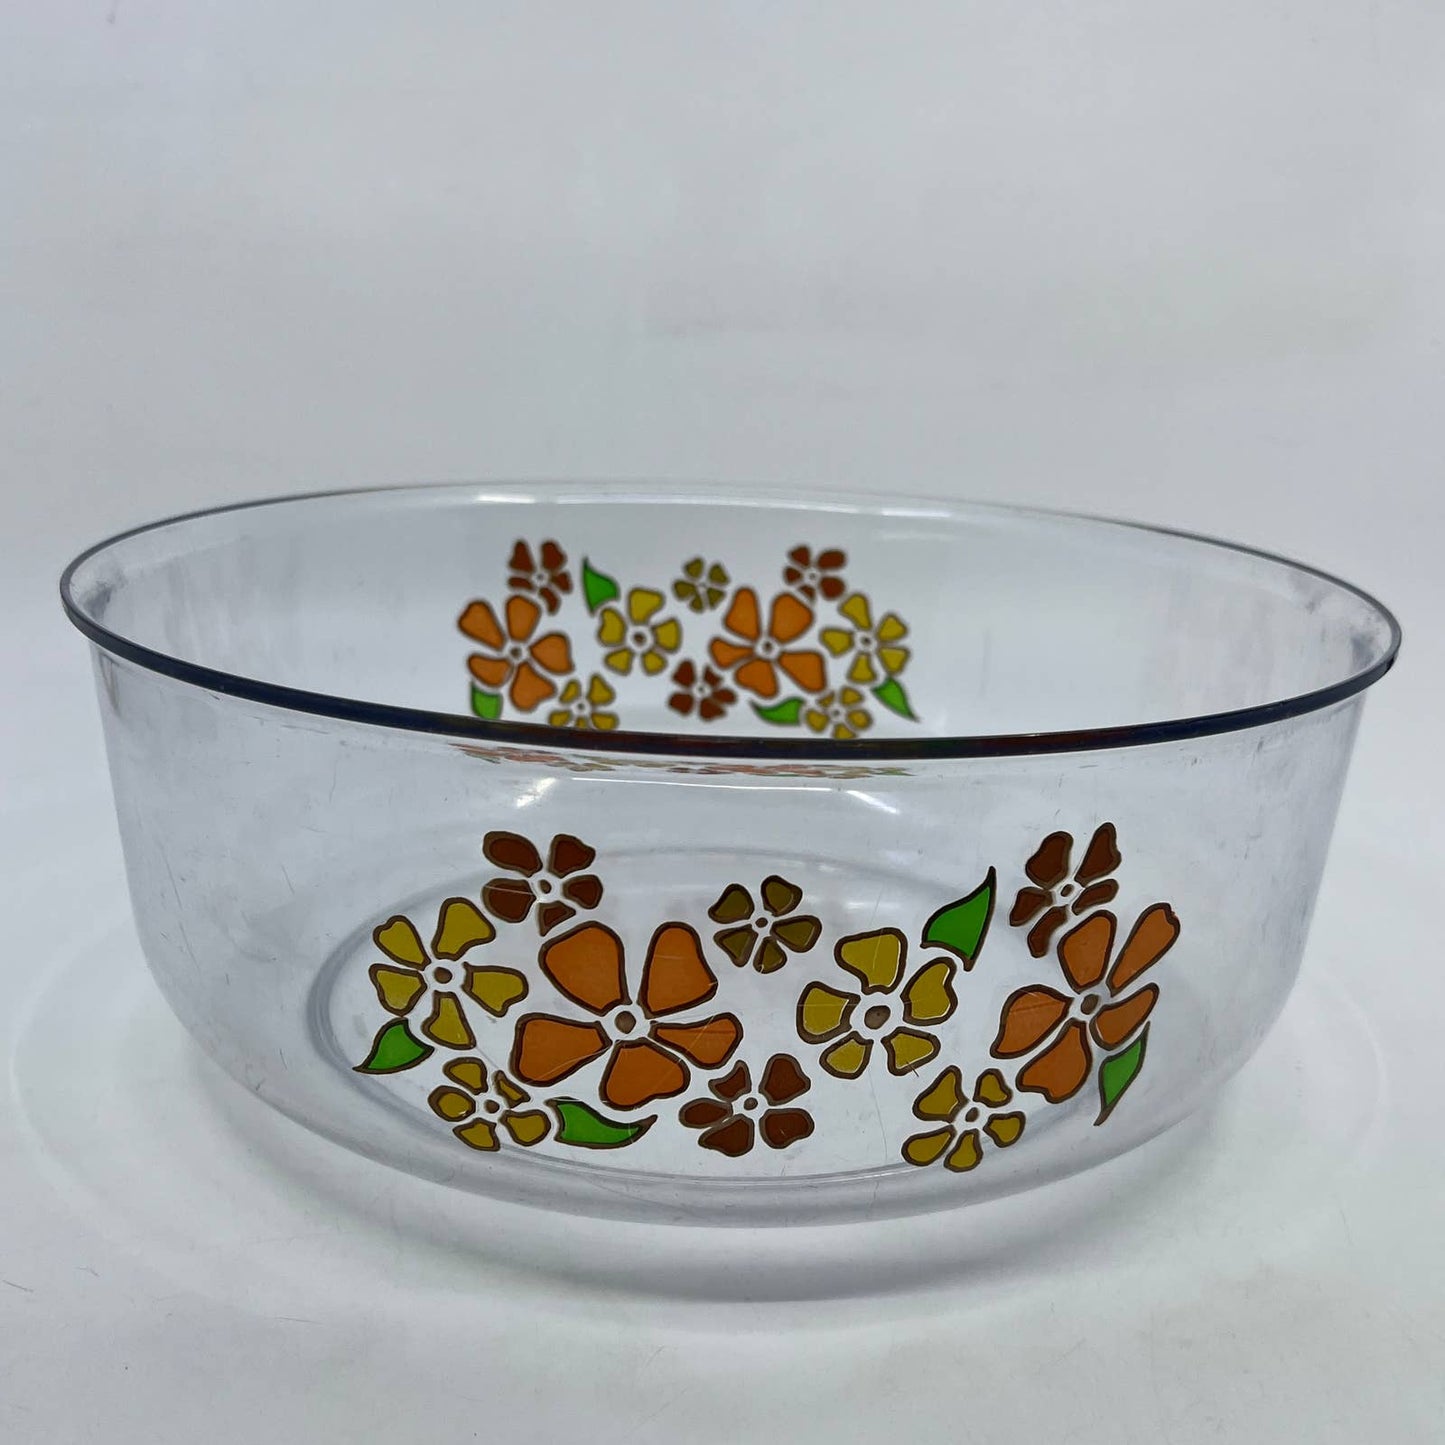 1970s Retro Thermoserv 16 Cup Store and Serve Mixing Serving Popcorn Bowl TI1